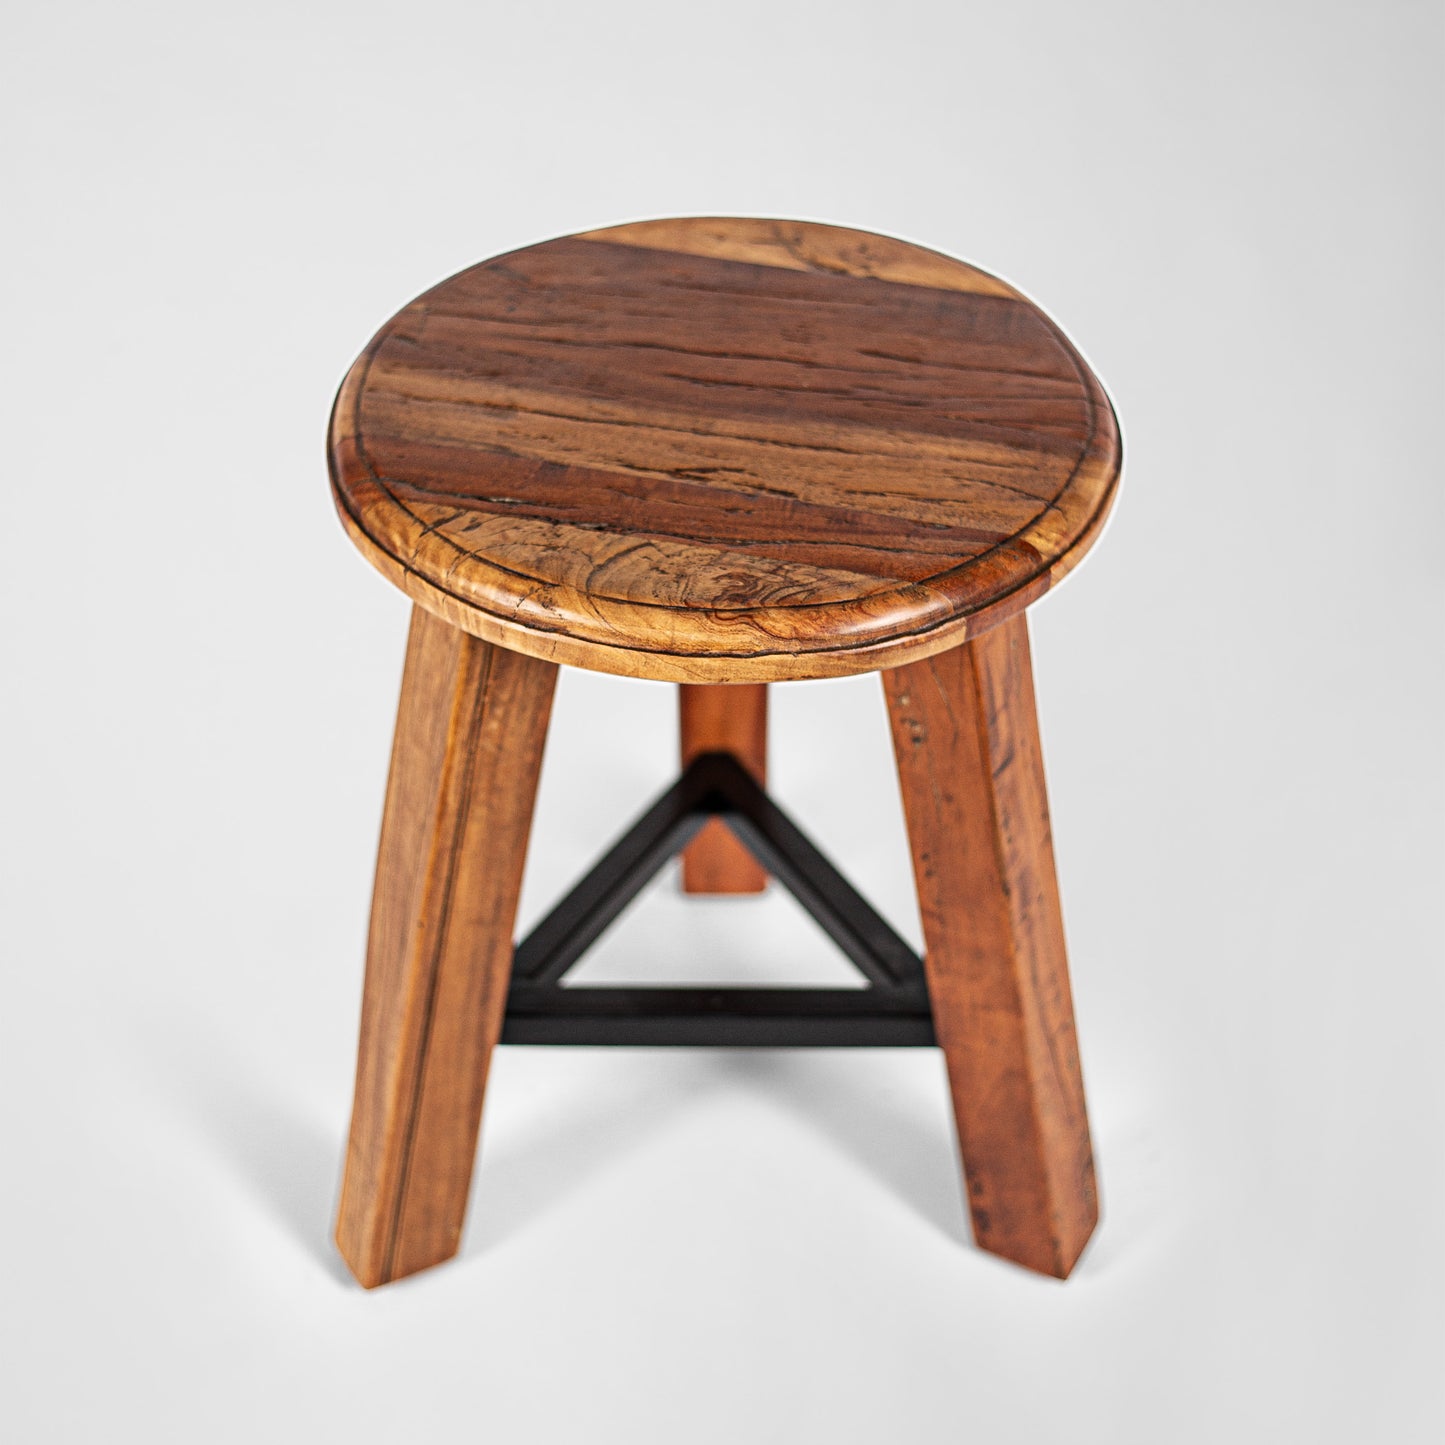 Babawood – Handmade country house design stool made of wood